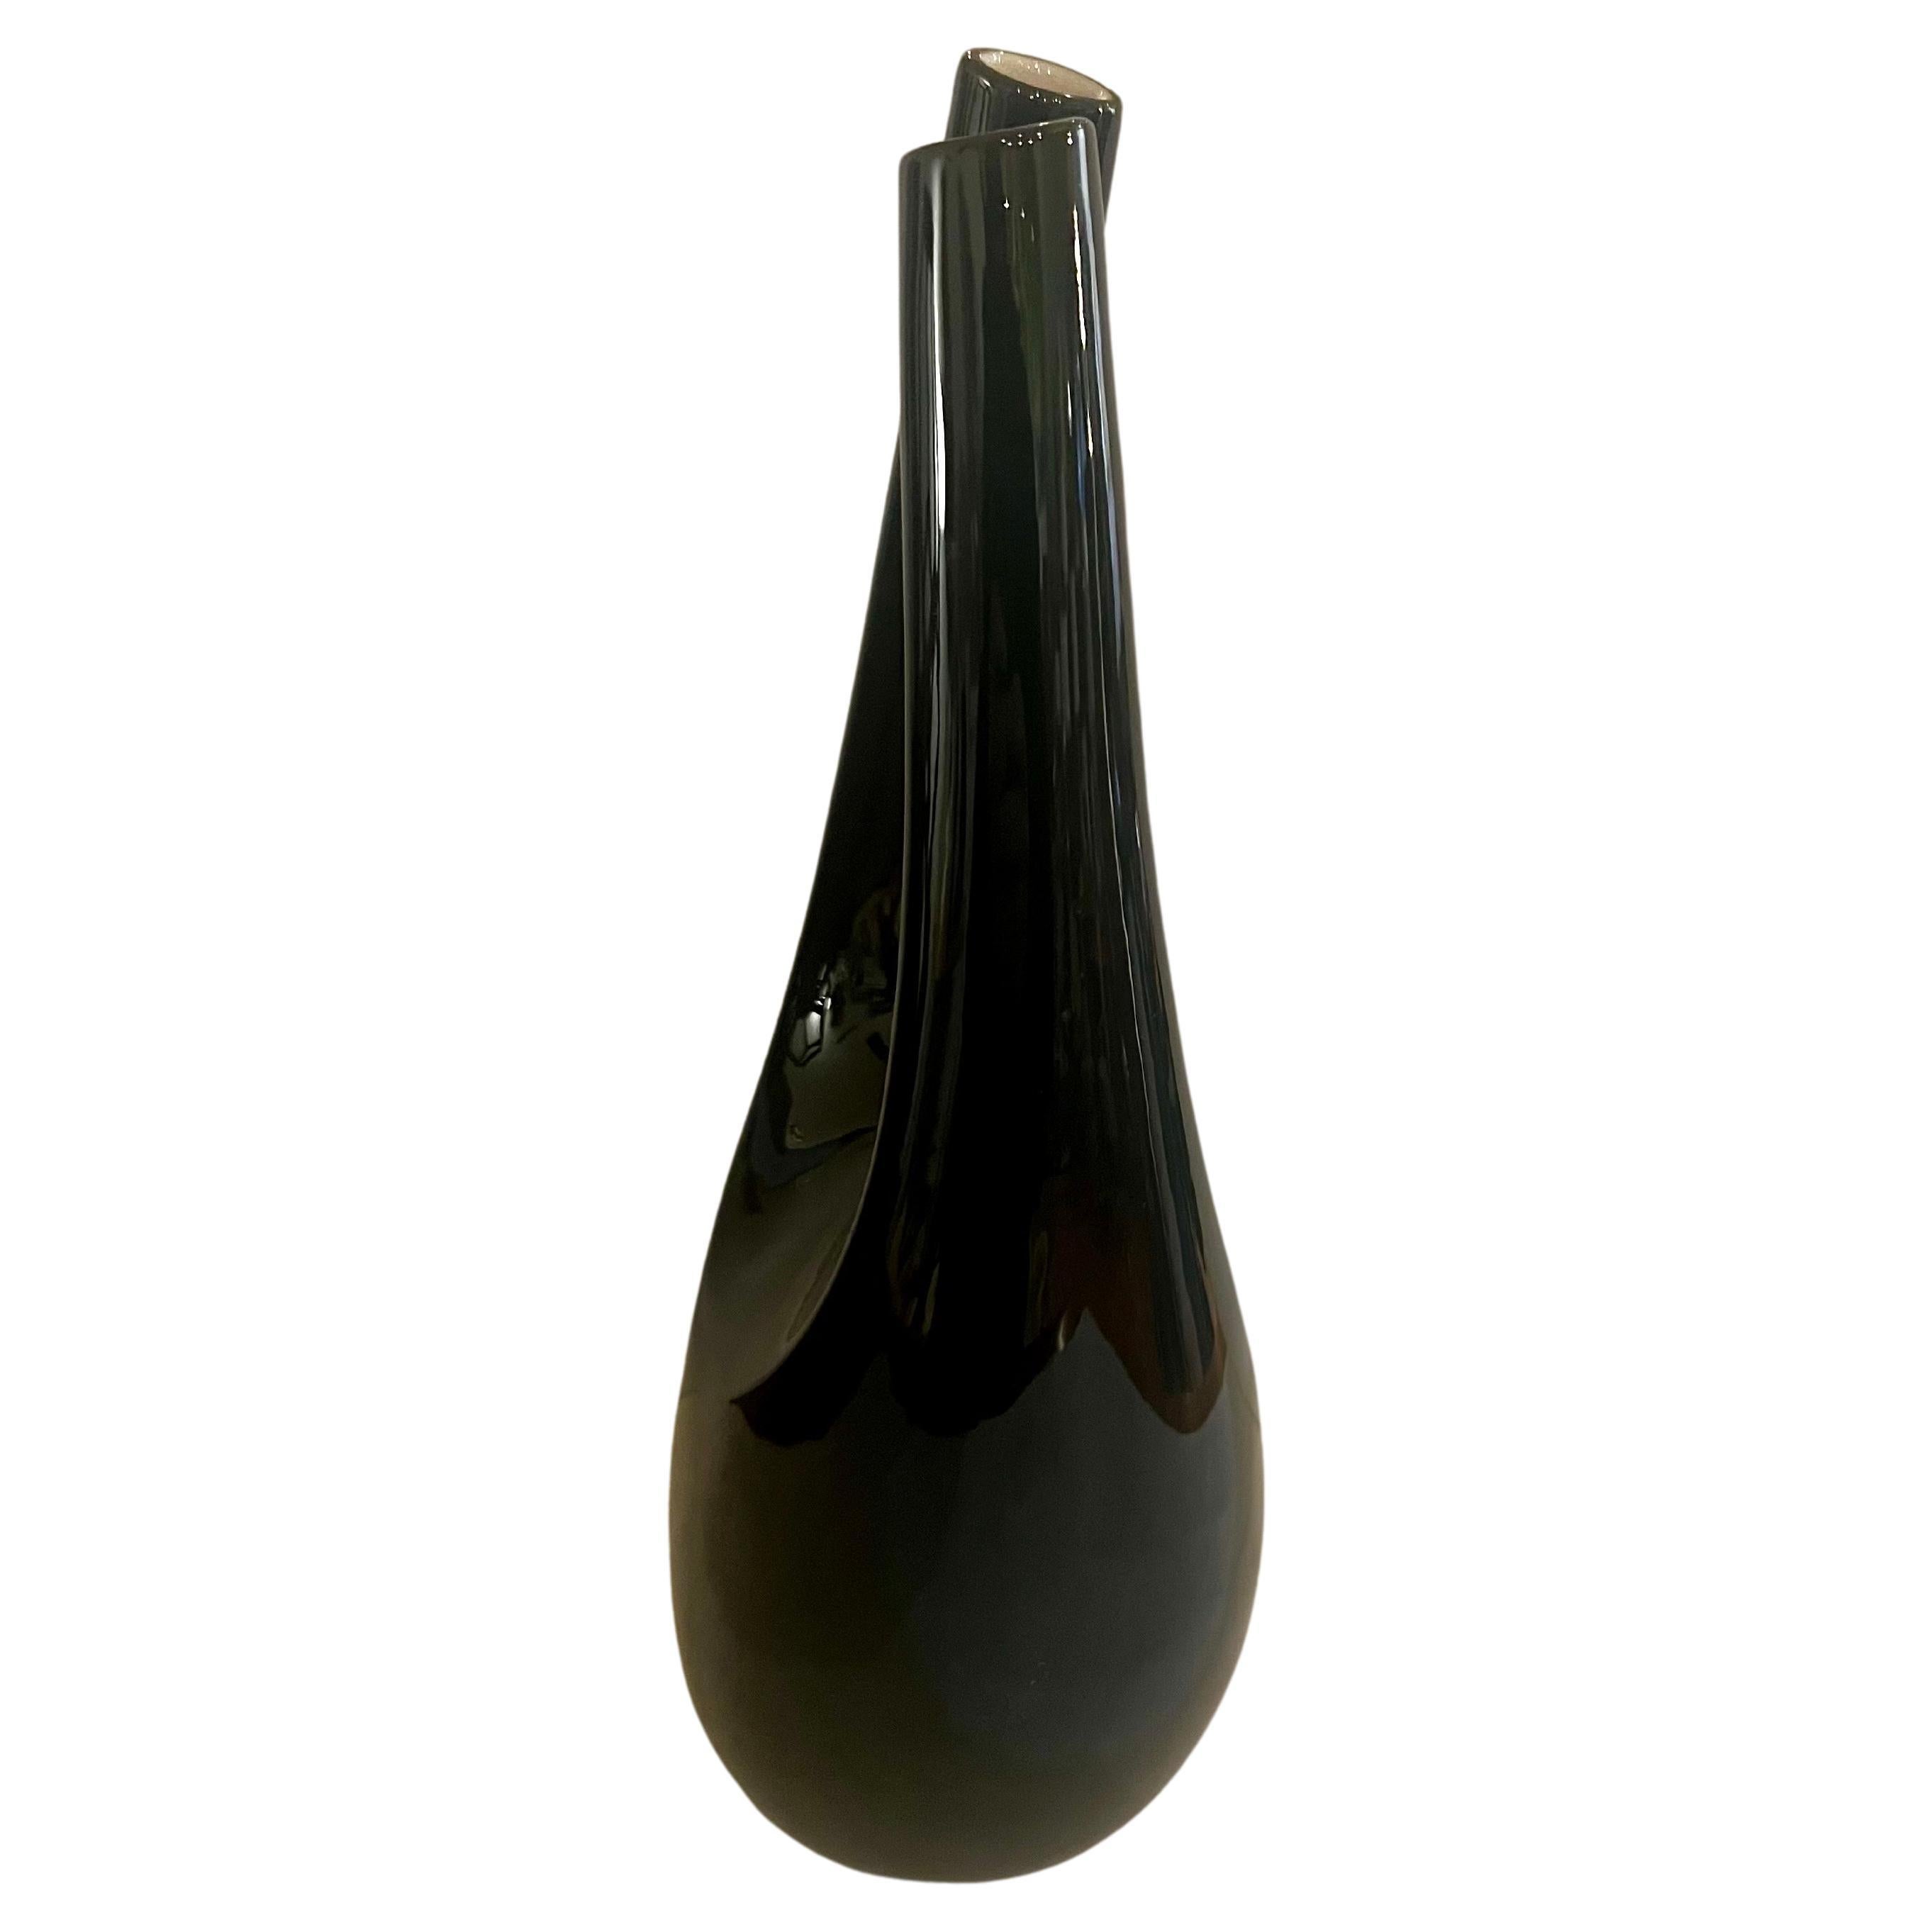 Beautiful elegant porcelain glossy black and white interior double twisted head vase circa 1960's by Franciscan China.